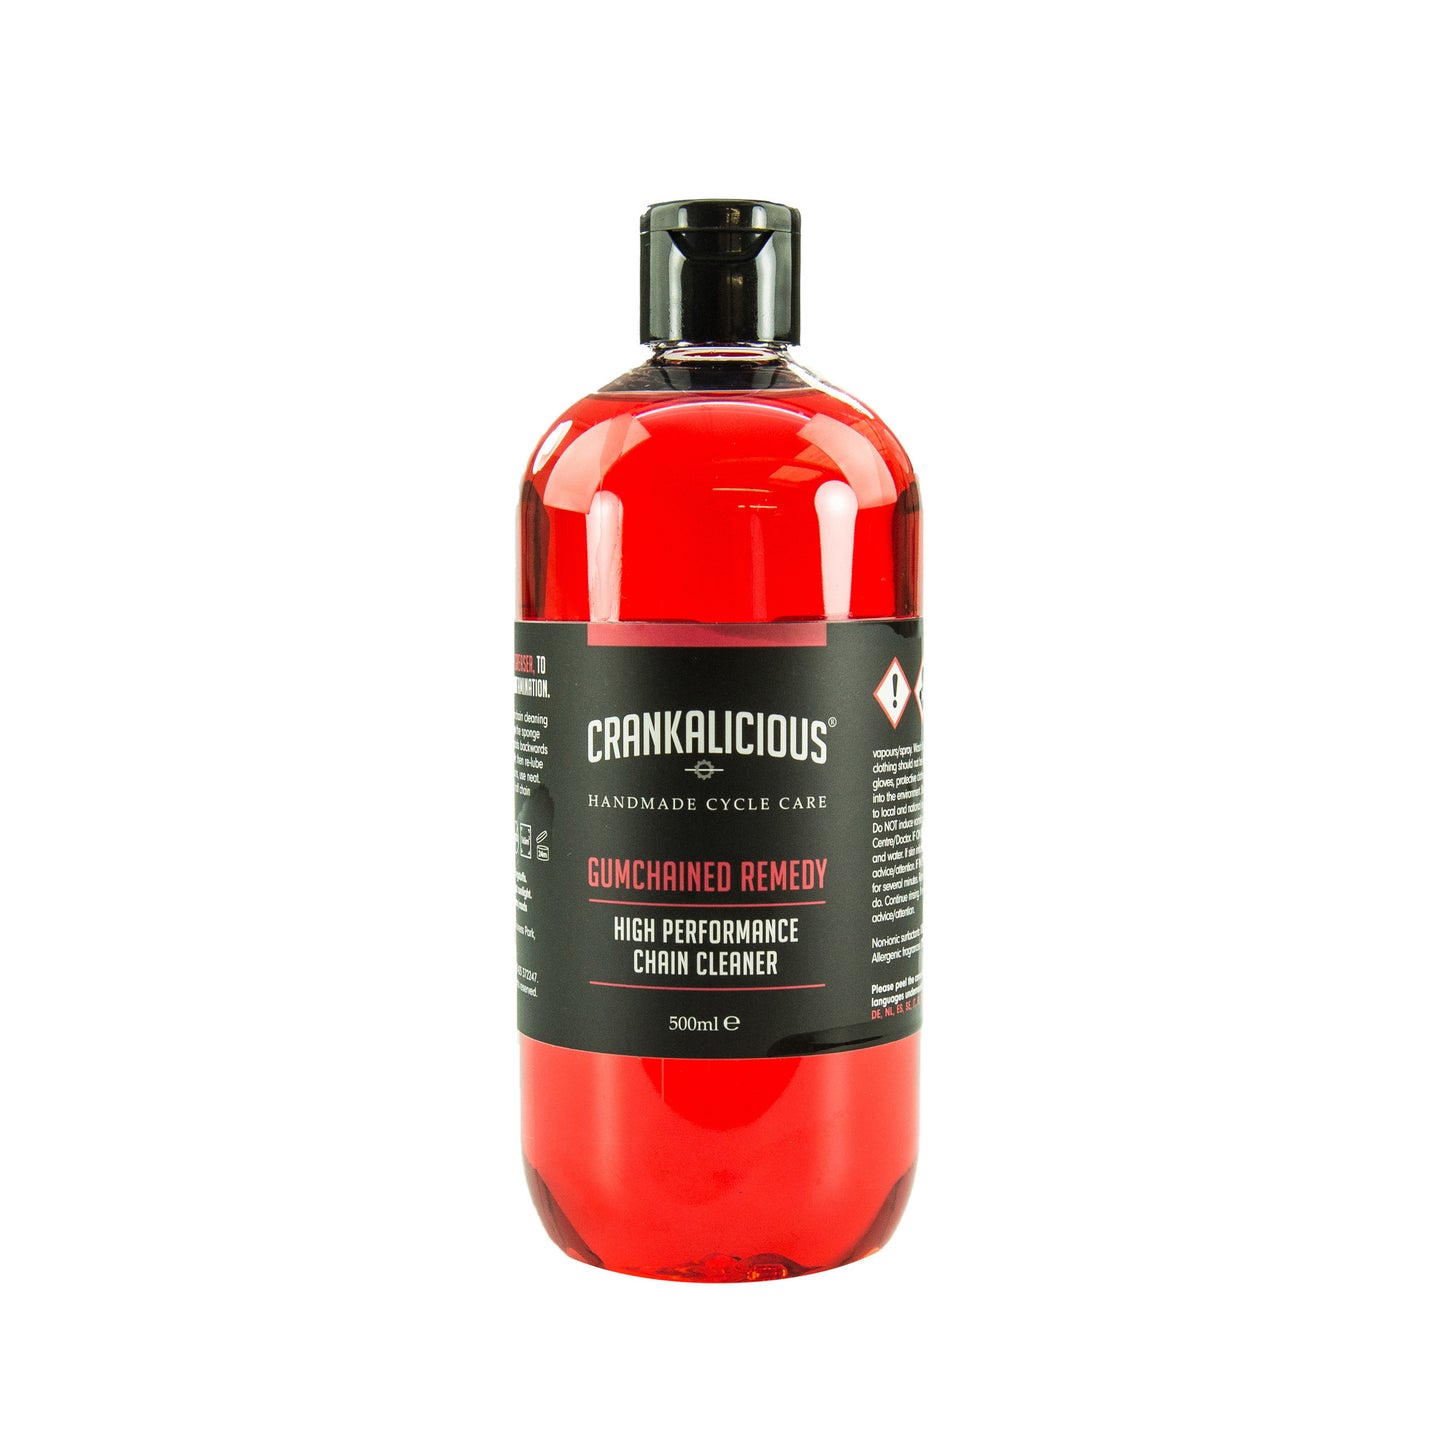 Gumchained Remedy chain cleaner 500ml - Trade Case (x6) - HS 340530, Chain Cleaner - Crankalicious